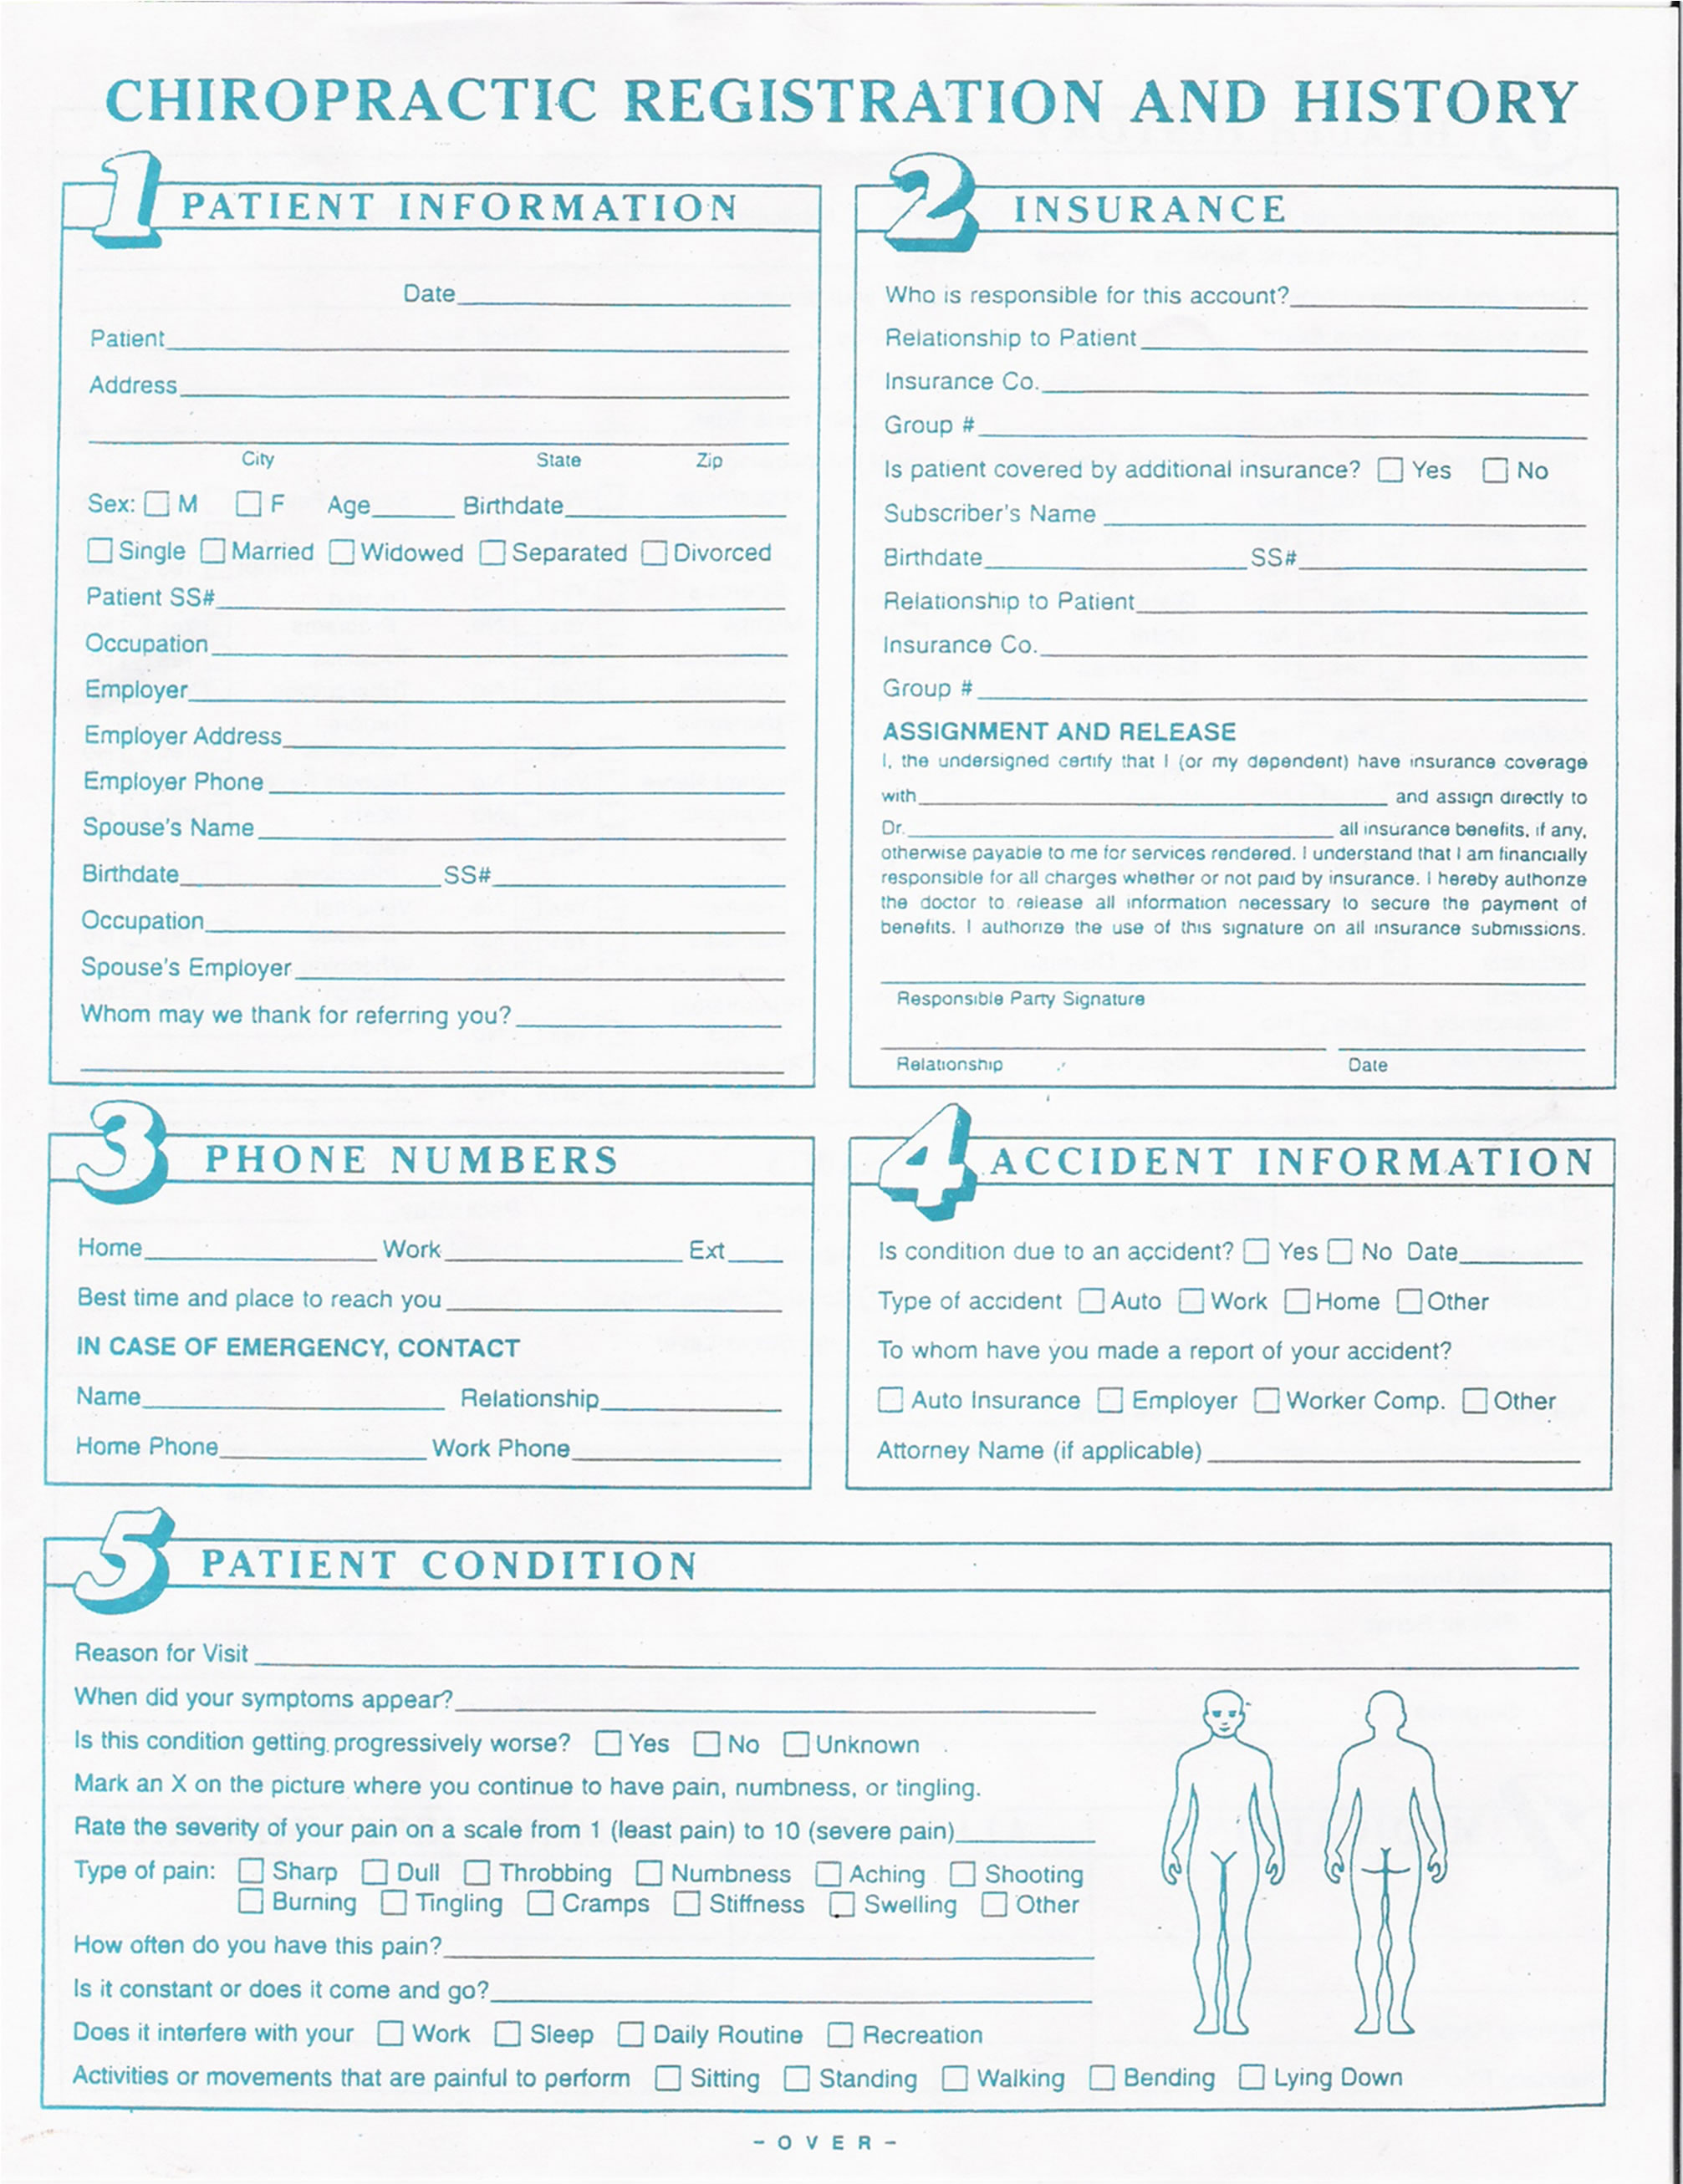 5 Best Images of Printable Chiropractic Forms Chiropractic New